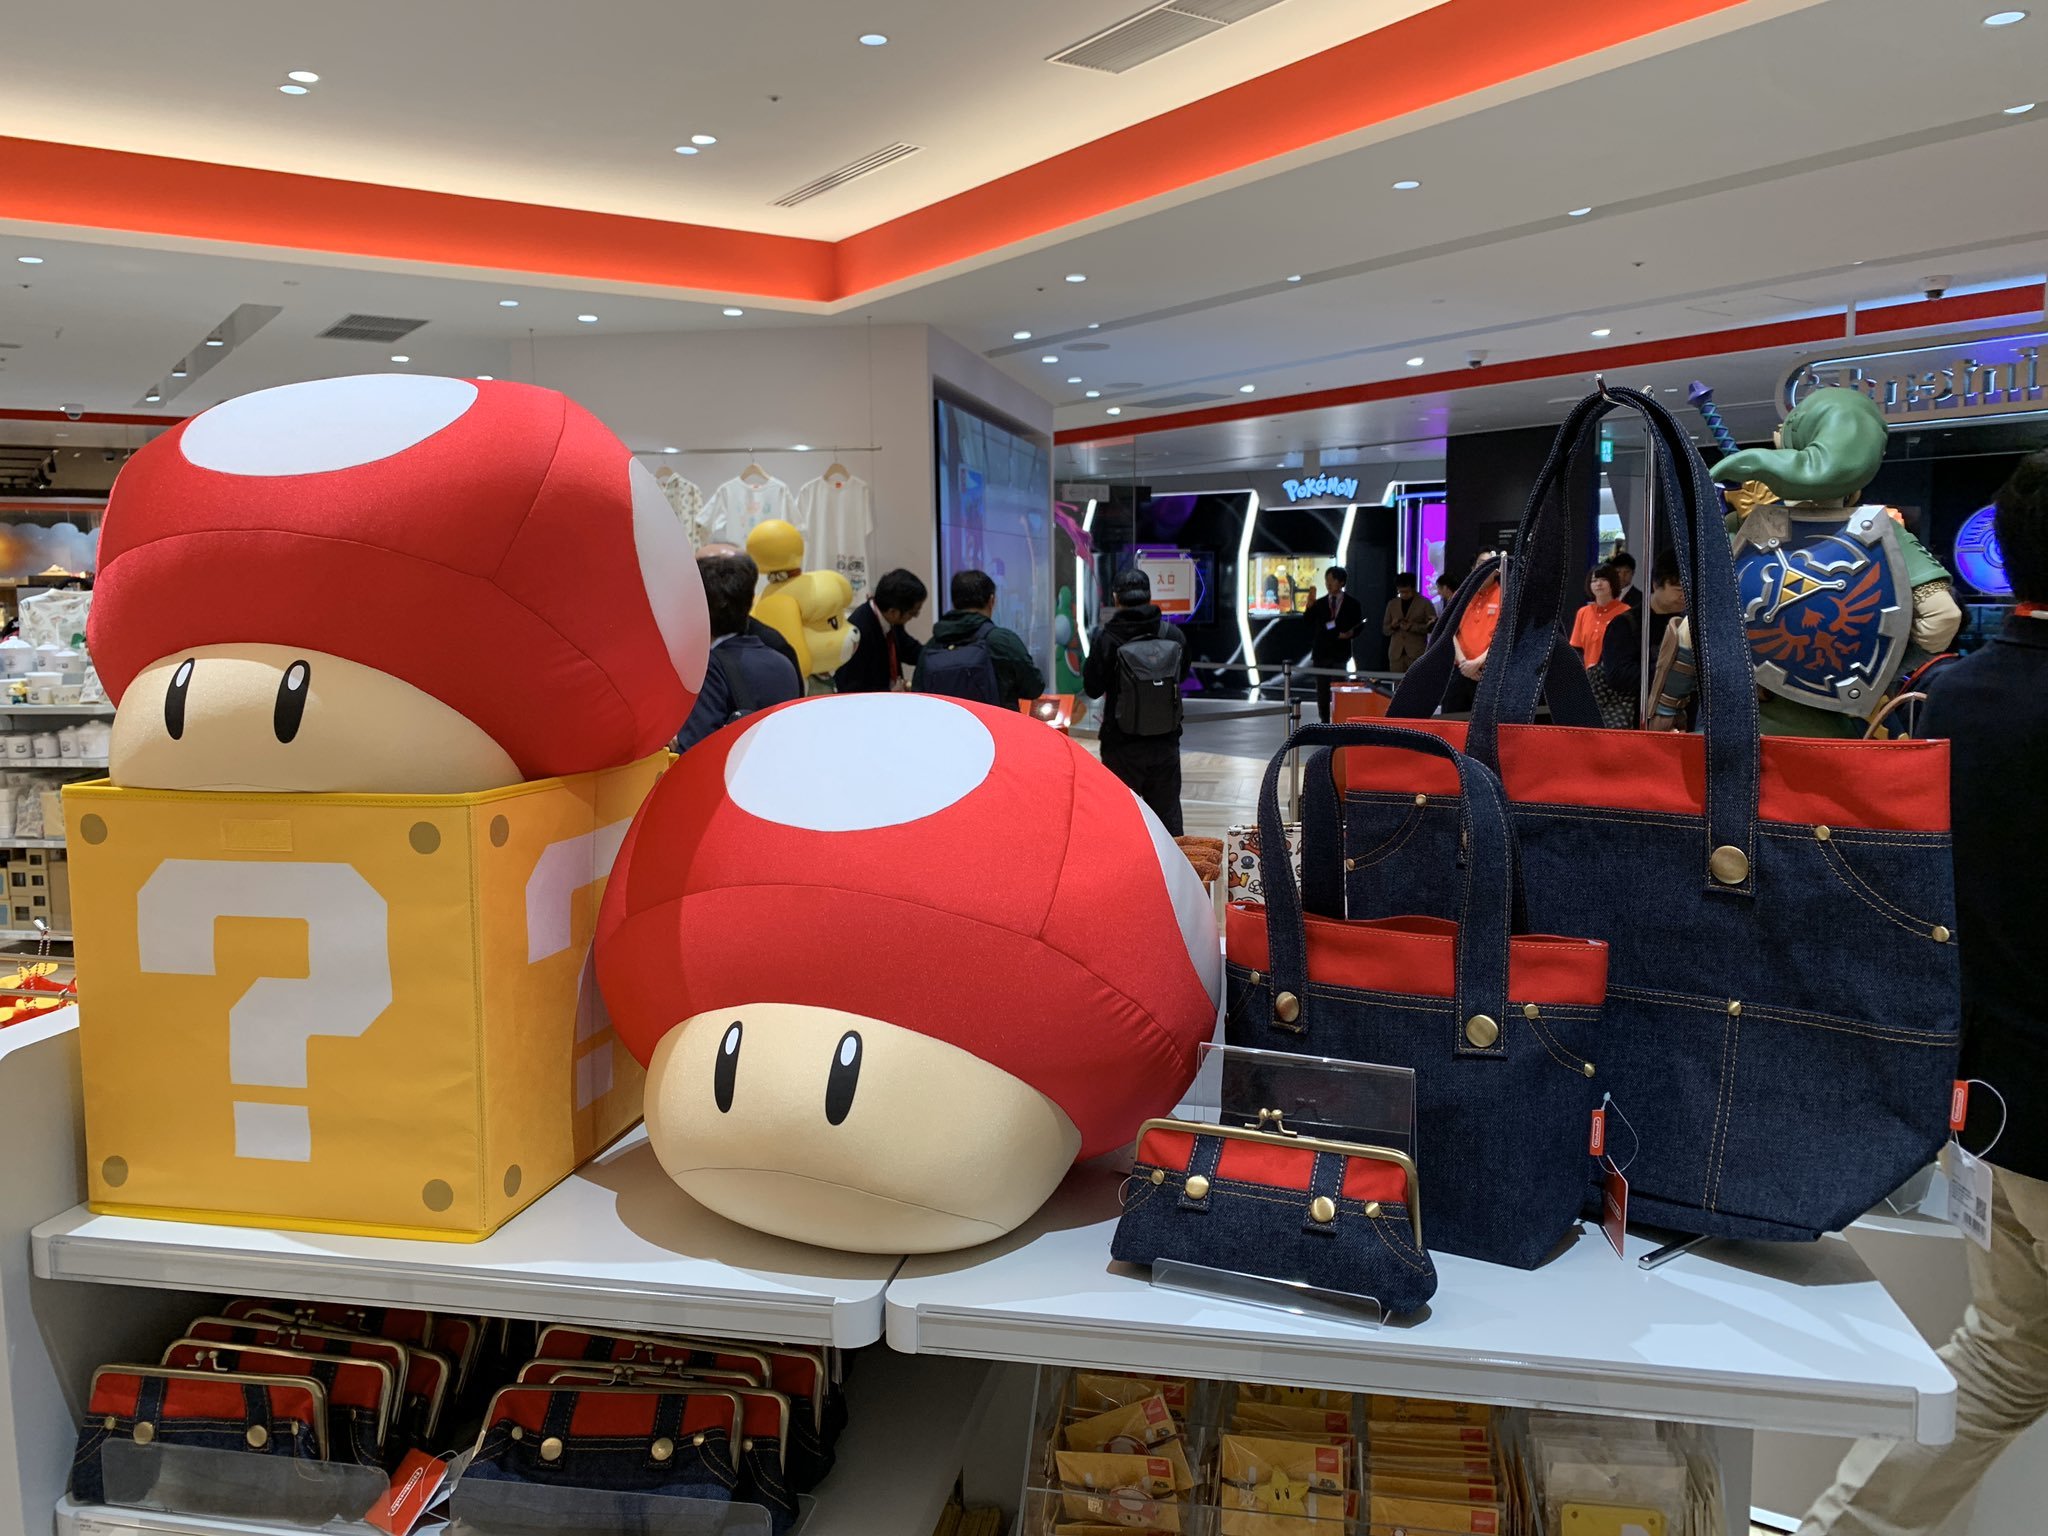 Gallery: The first images of Nintendo's Tokyo Store